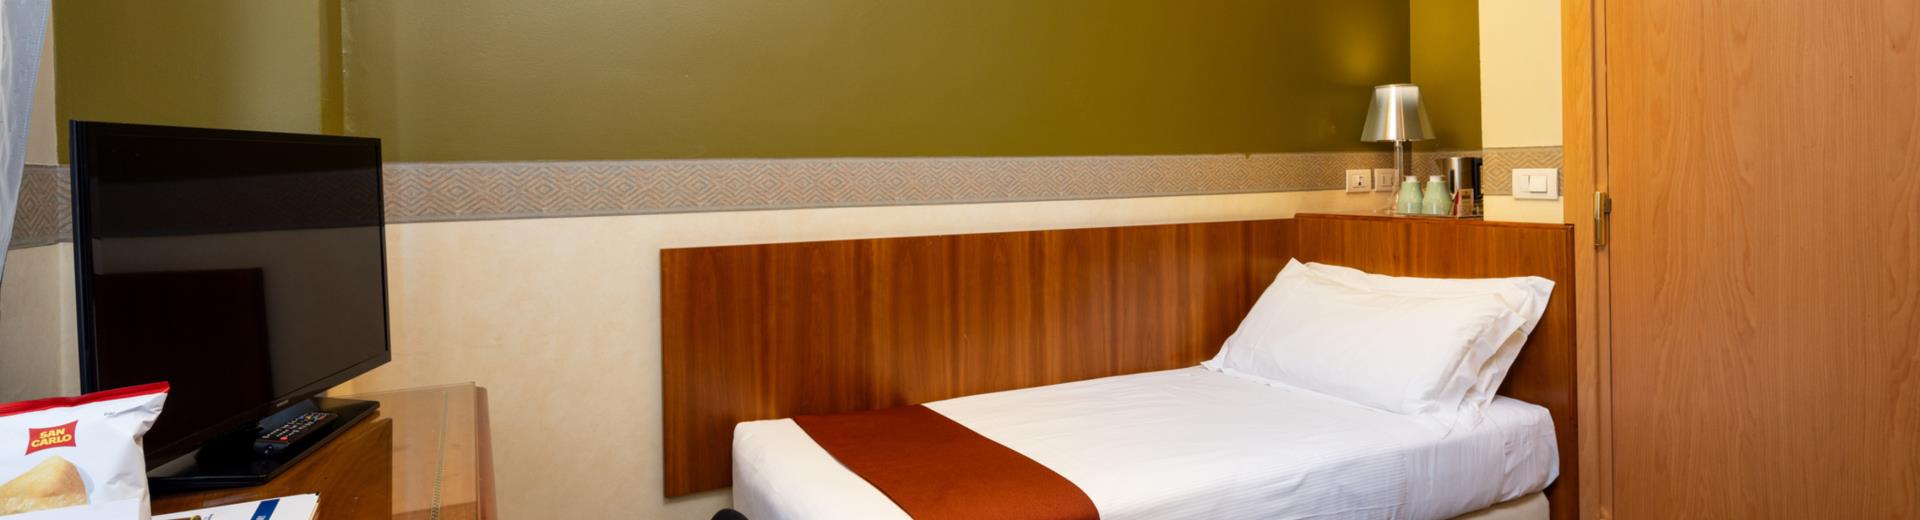 A small single room at the Best Western Hotel Major in Milan. Comfortable and welcoming, it is equipped with a 32-inch LCD satellite TV with radio and alarm clock, free Wi-Fi internet and minibar.